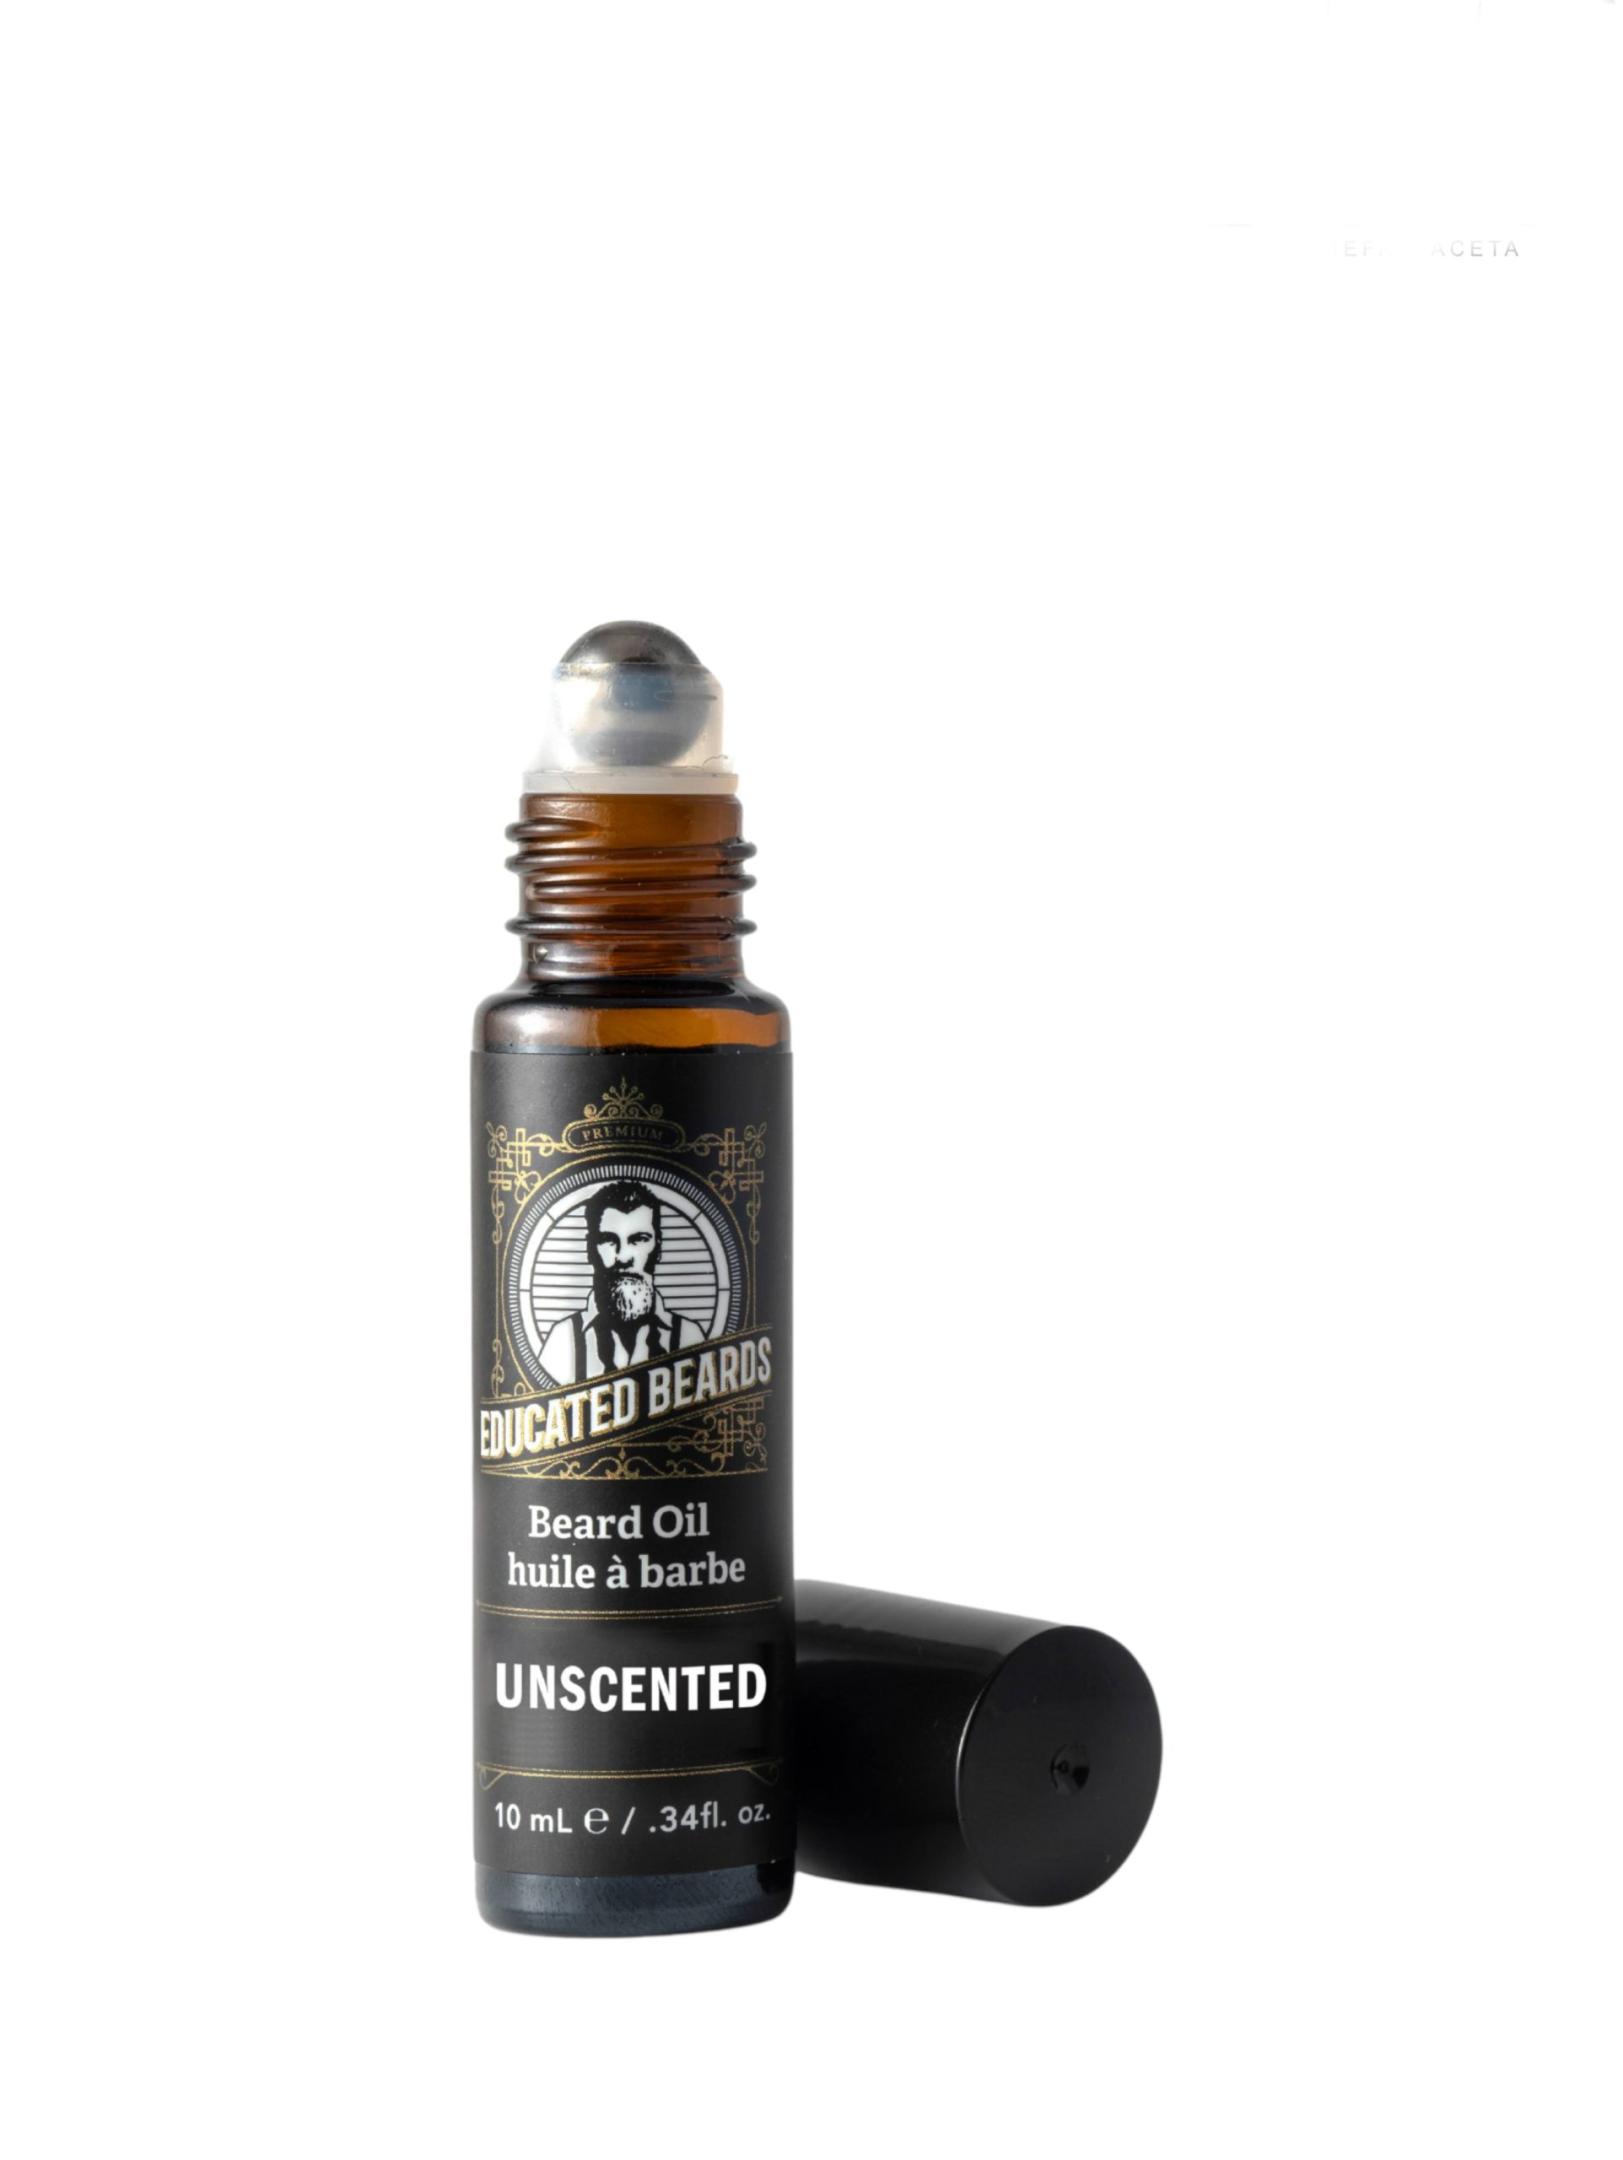 Educated Beards olejek do brody Unscented 10ml 1